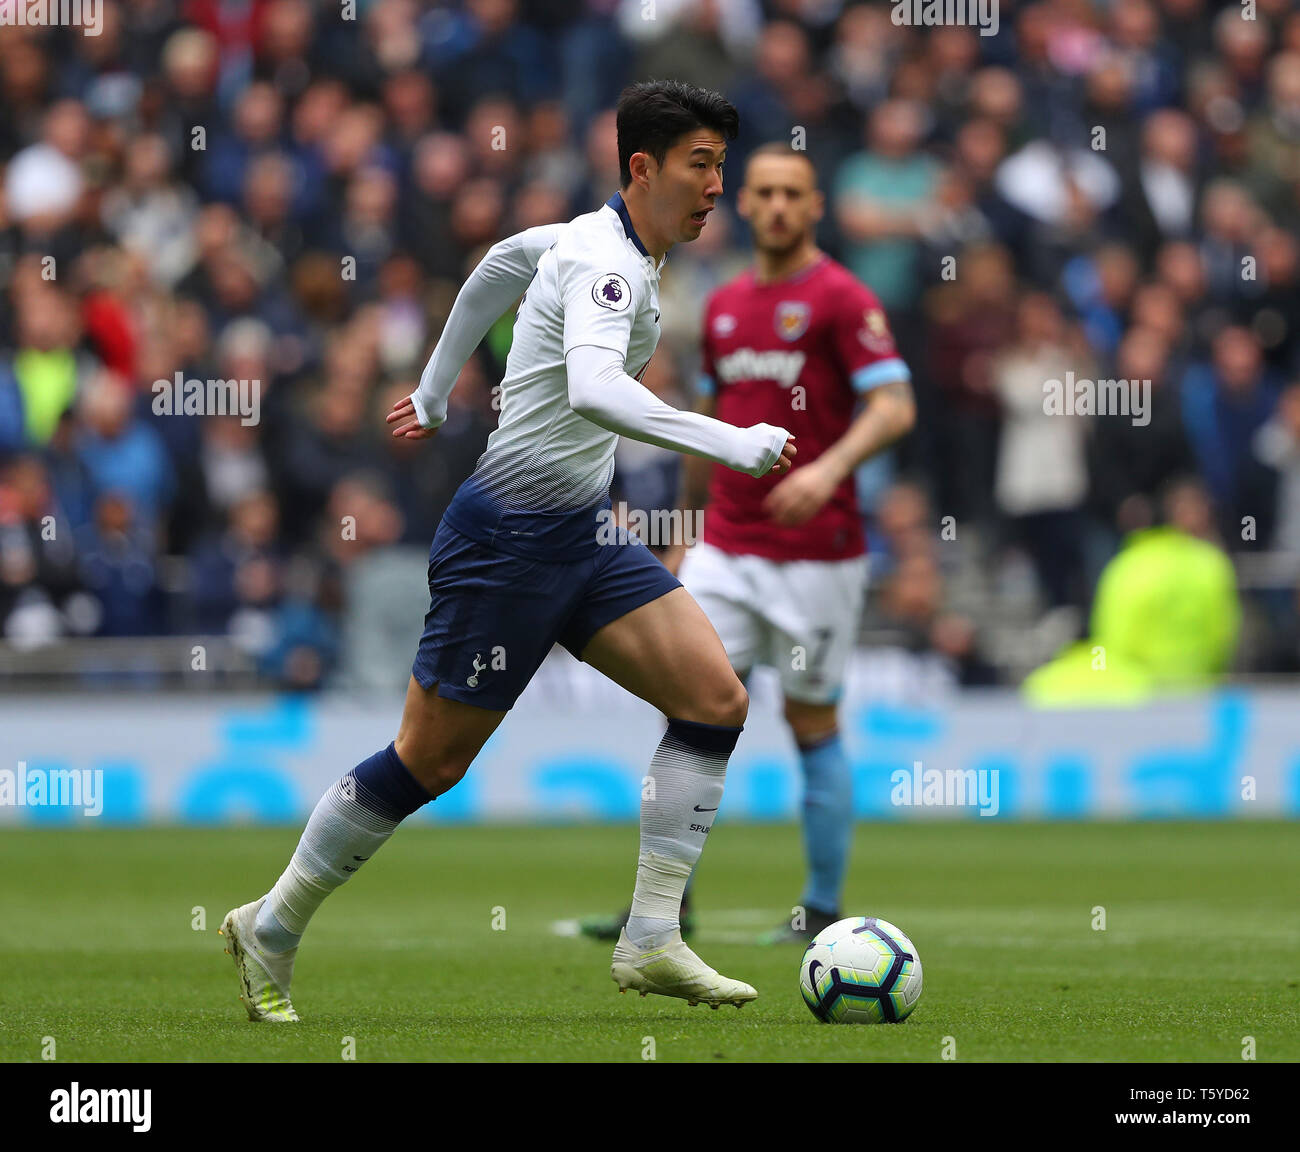 White Hart Lane Stadium, London England, UK, 27th April 2019. Son Heung-Min forward for Tottenham runs with the ball during the Barclays Premier League match between Tottenham Hotspur and West Ham Utd at White Hart Lane Stadium, London England on 27 April 2019. Stock Photo